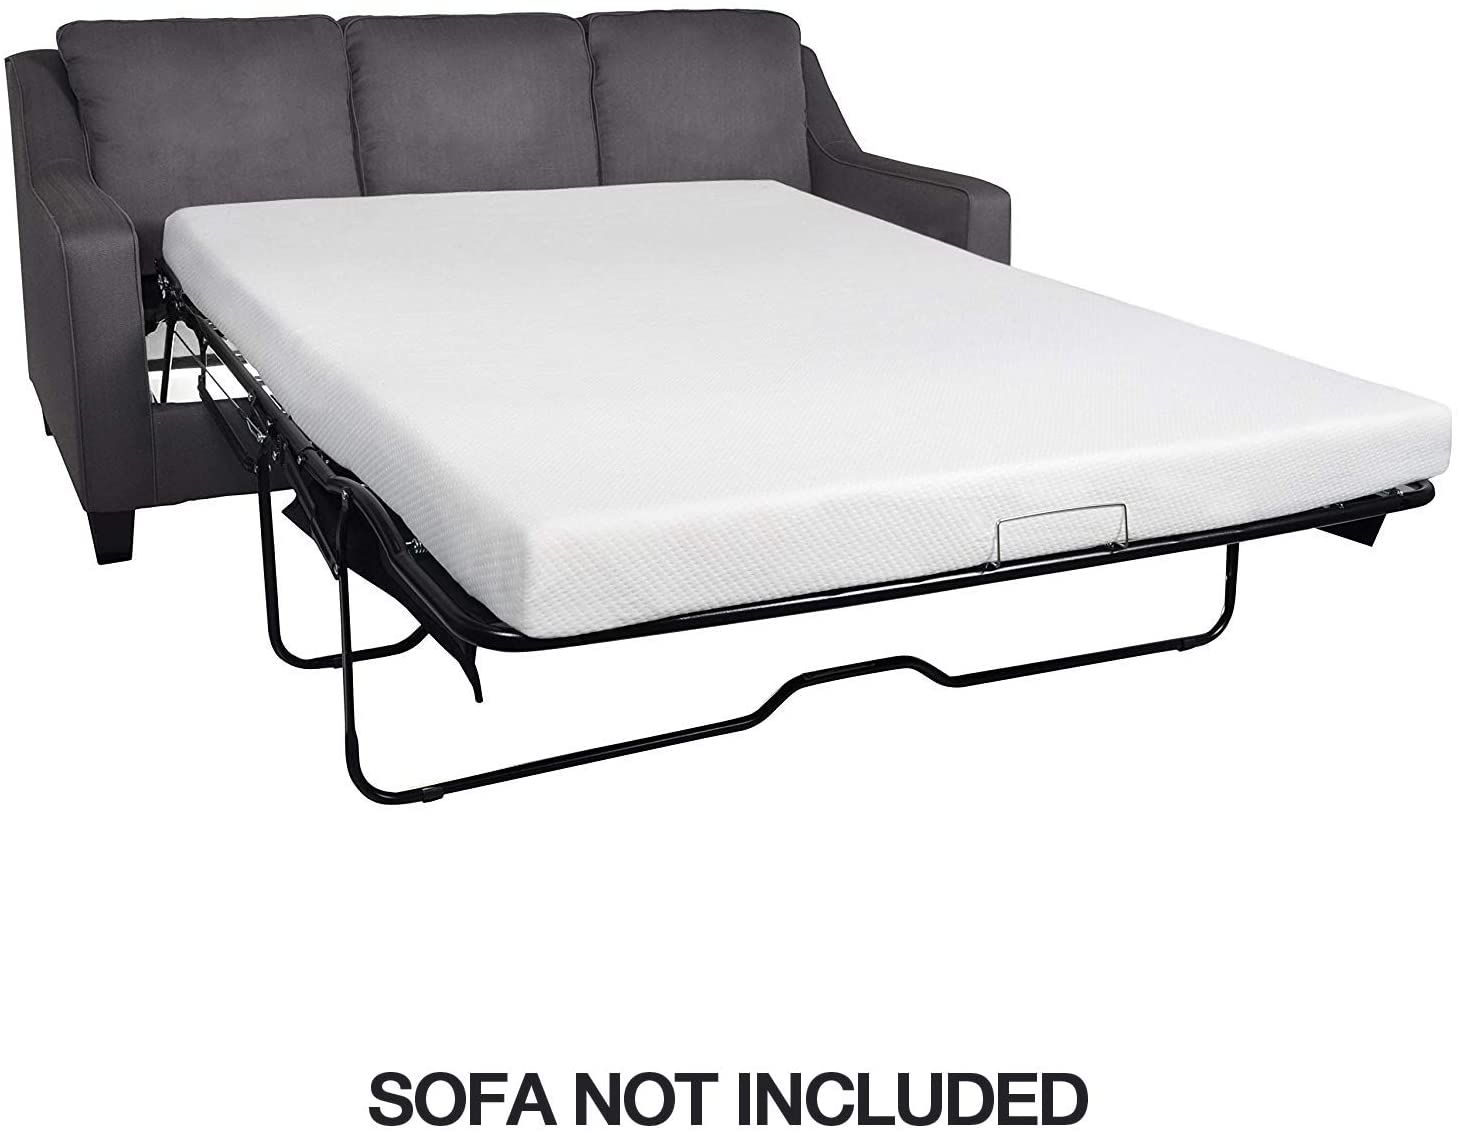 4.5 inch replacement mattress for sofa bed